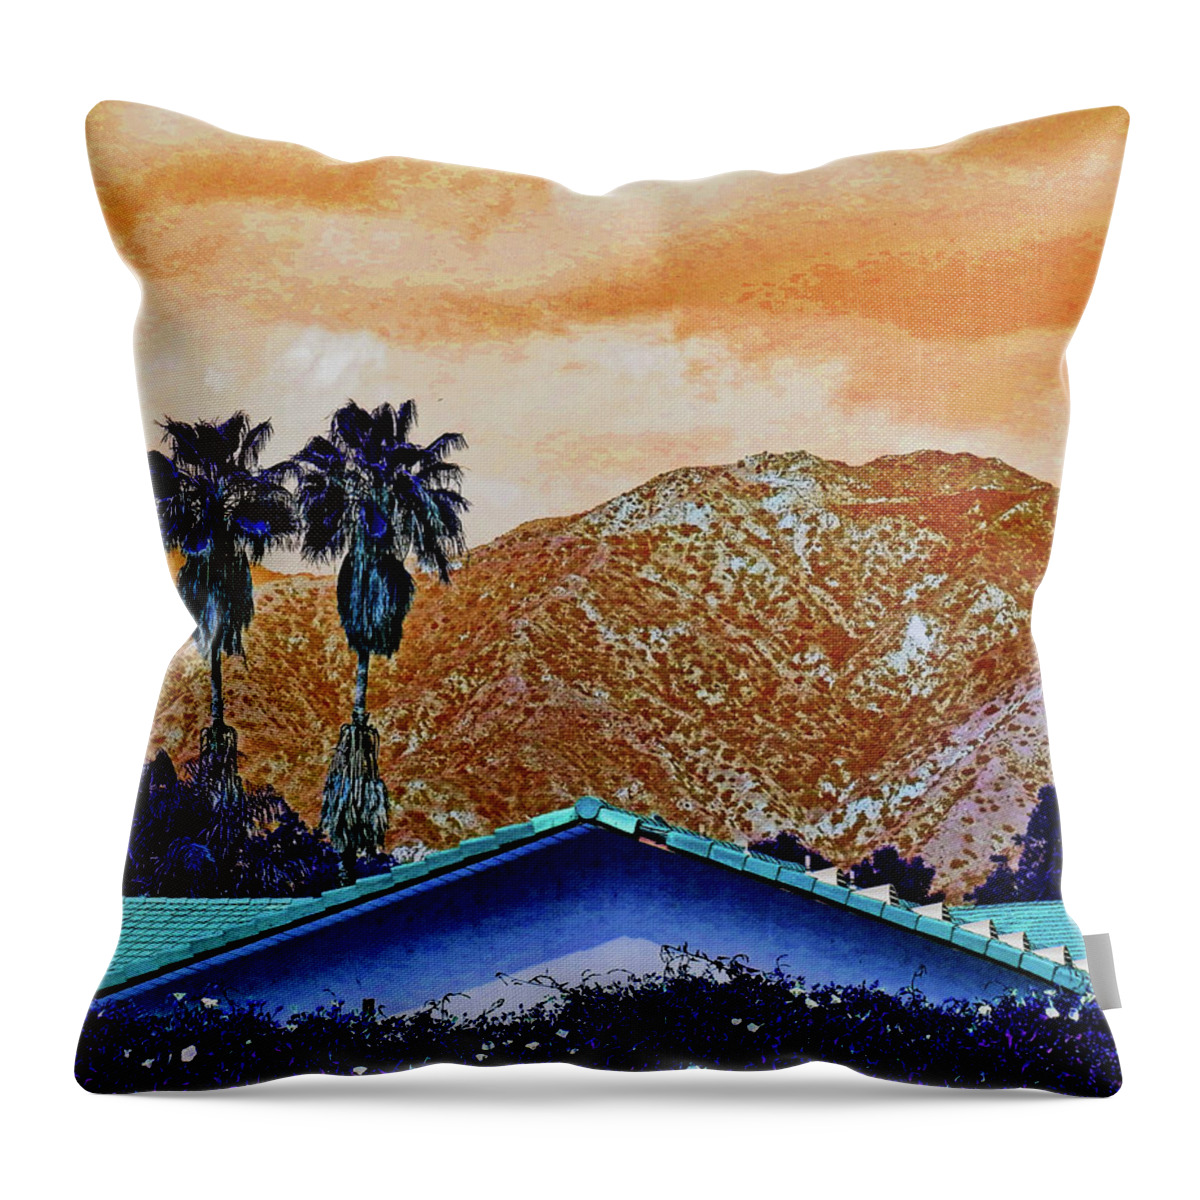 Tint Throw Pillow featuring the photograph Tinted Verdugos by Andrew Lawrence